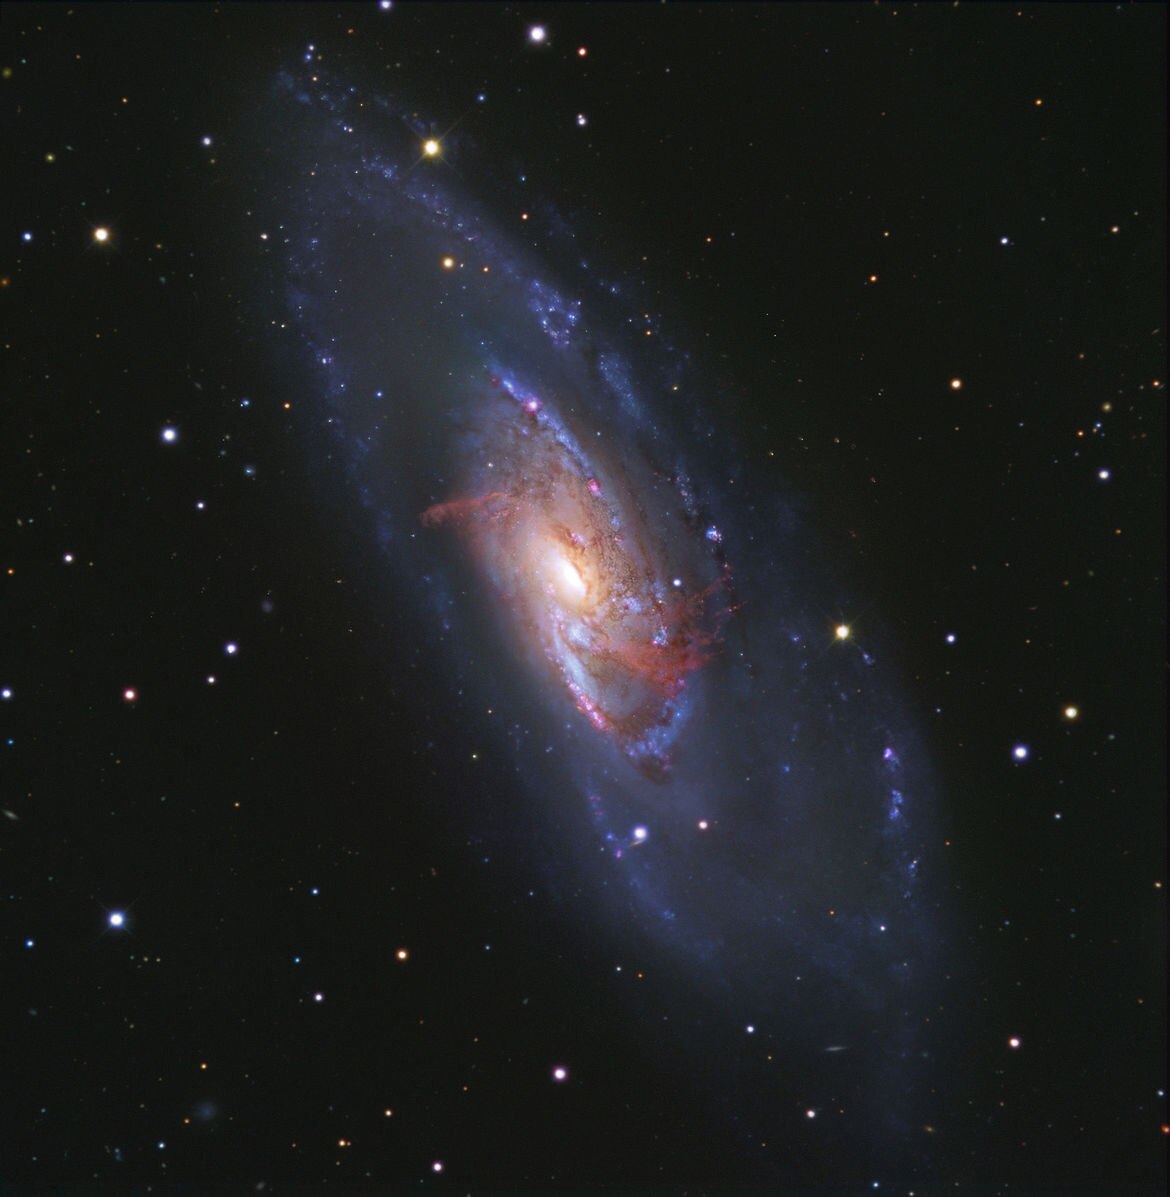 The galaxy M 106, in observations taken by Hubble Space Telescope combined with two smaller (but wider field of view) telescopes. The inner red arms arenât actually spiral arms, but gas heated by a supermassive black hole.